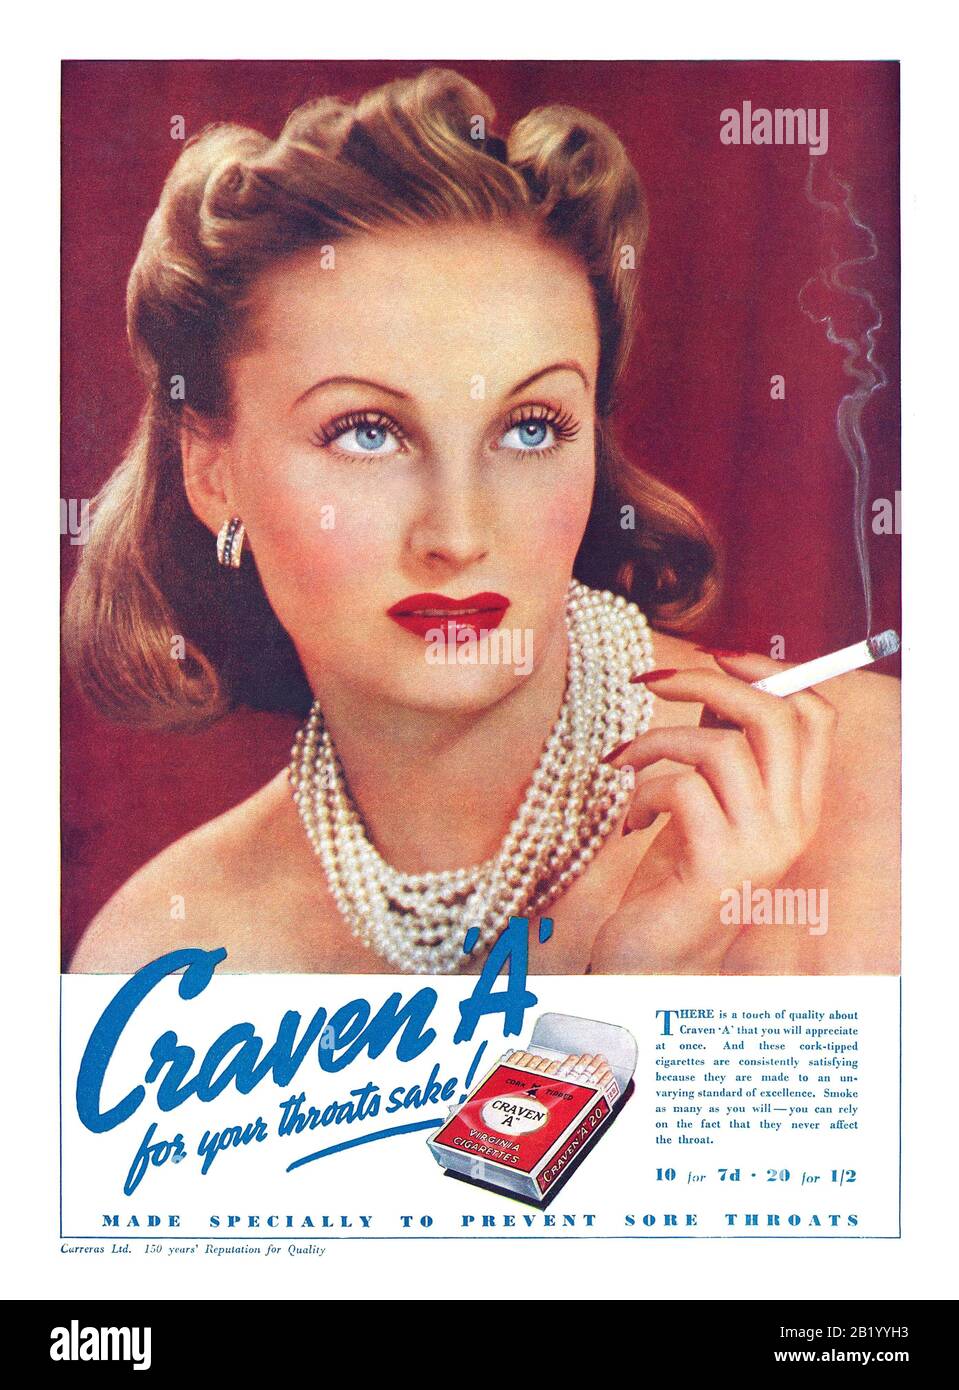 Vintage 1940’s Cigarette Advertisement for Craven ‘A’  ‘made specially to prevent sore throats’  ‘FOR YOUR THROATS SAKE’ Cork Tipped so no matter how many you smoke Craven 'A' will NEVER affect your throat !! Stock Photo